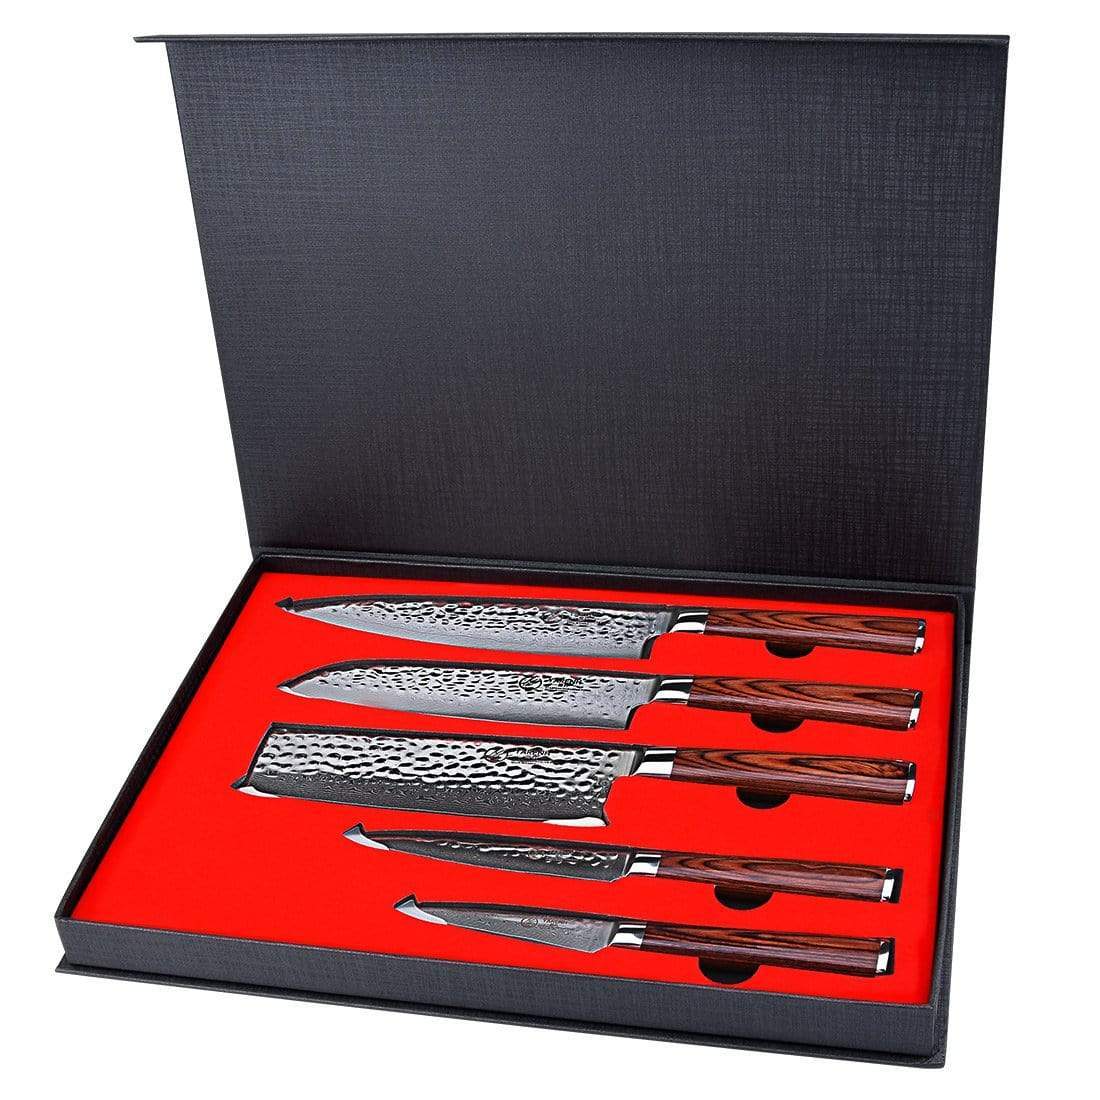 YARENH Kitchen Knife Set Without Block, 5 Piece Professional Sharp Chef Knives,Damascus Stainless Steel, 73 Layers, Full Tang, Dalbergia Wood Handle